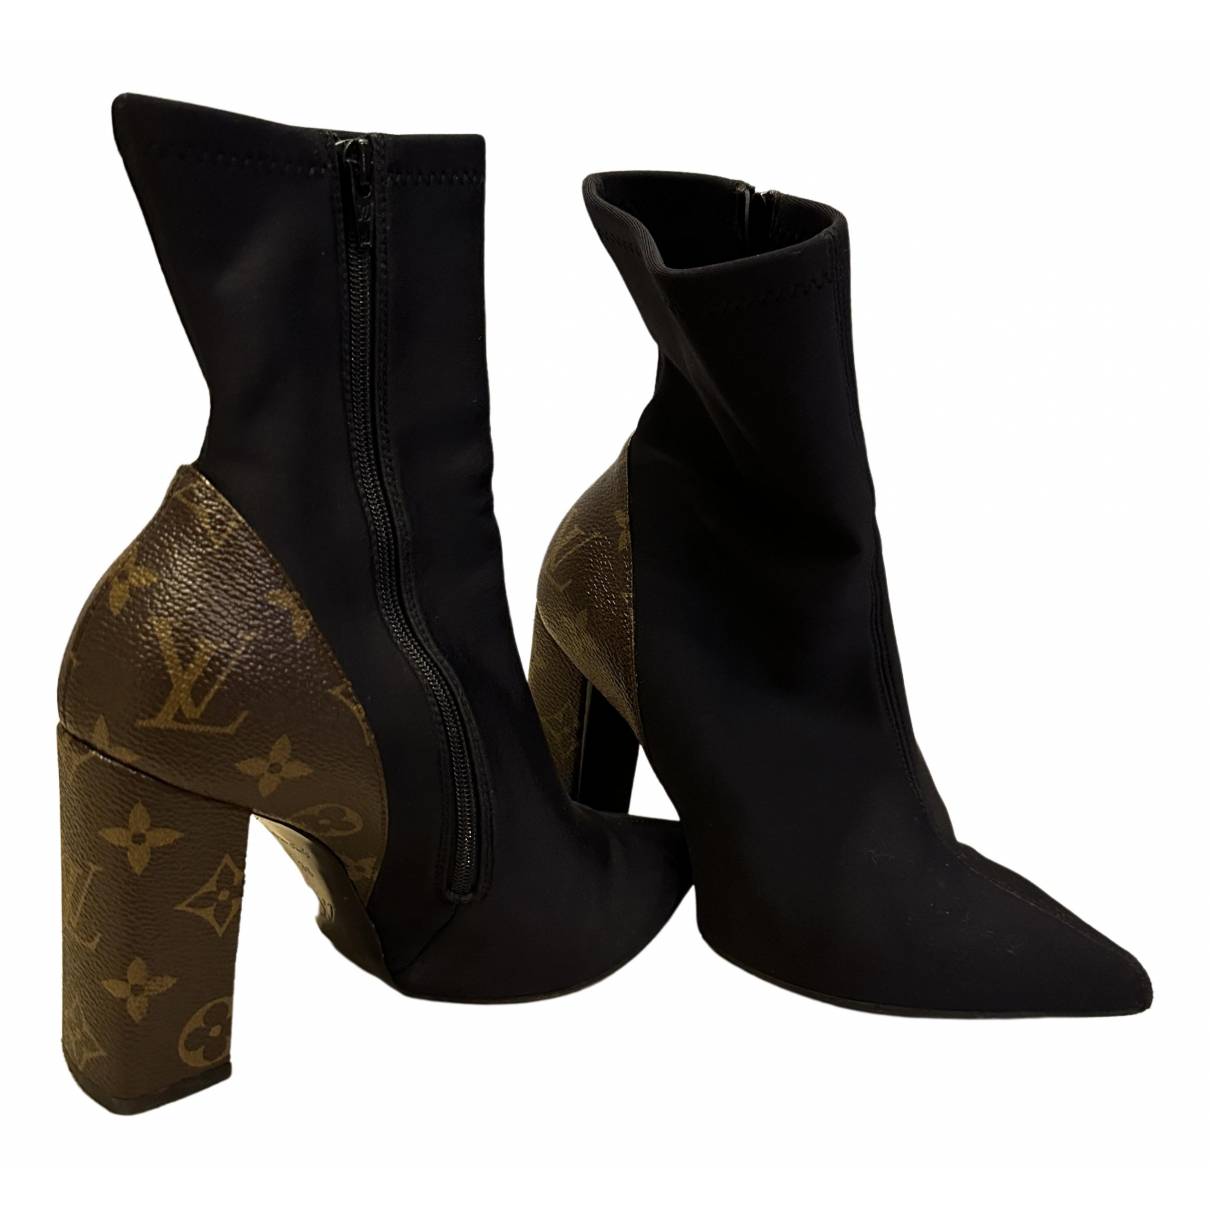 Louis Vuitton Authenticated Pony-Style Ankle Boots